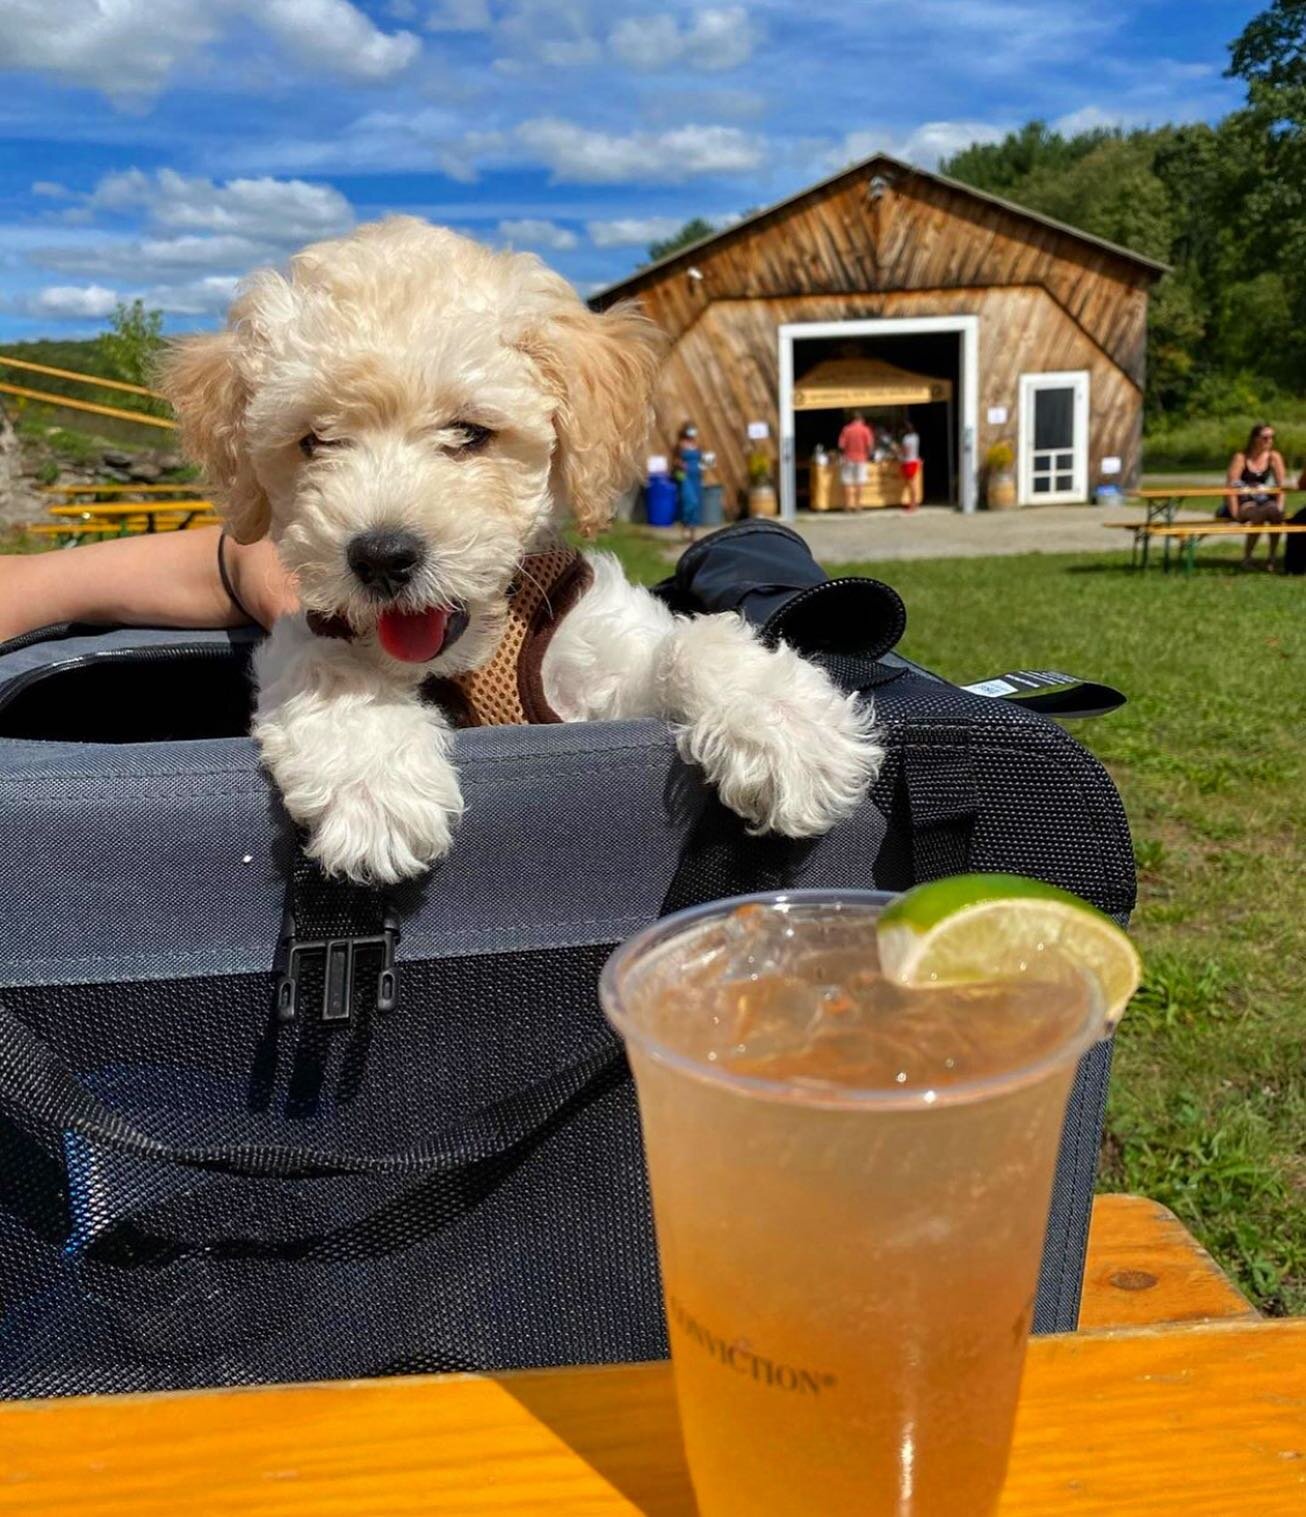 Is Dutch&rsquo;s Spirits dog friendly? You betcha! Well-behaved pups are totally welcome. We have fresh water bowls onsite and we just ask that your fur babies stay on leash while exploring the property! 🐶👍

Photo by the sweet @zouzouzelda

#Dutchs